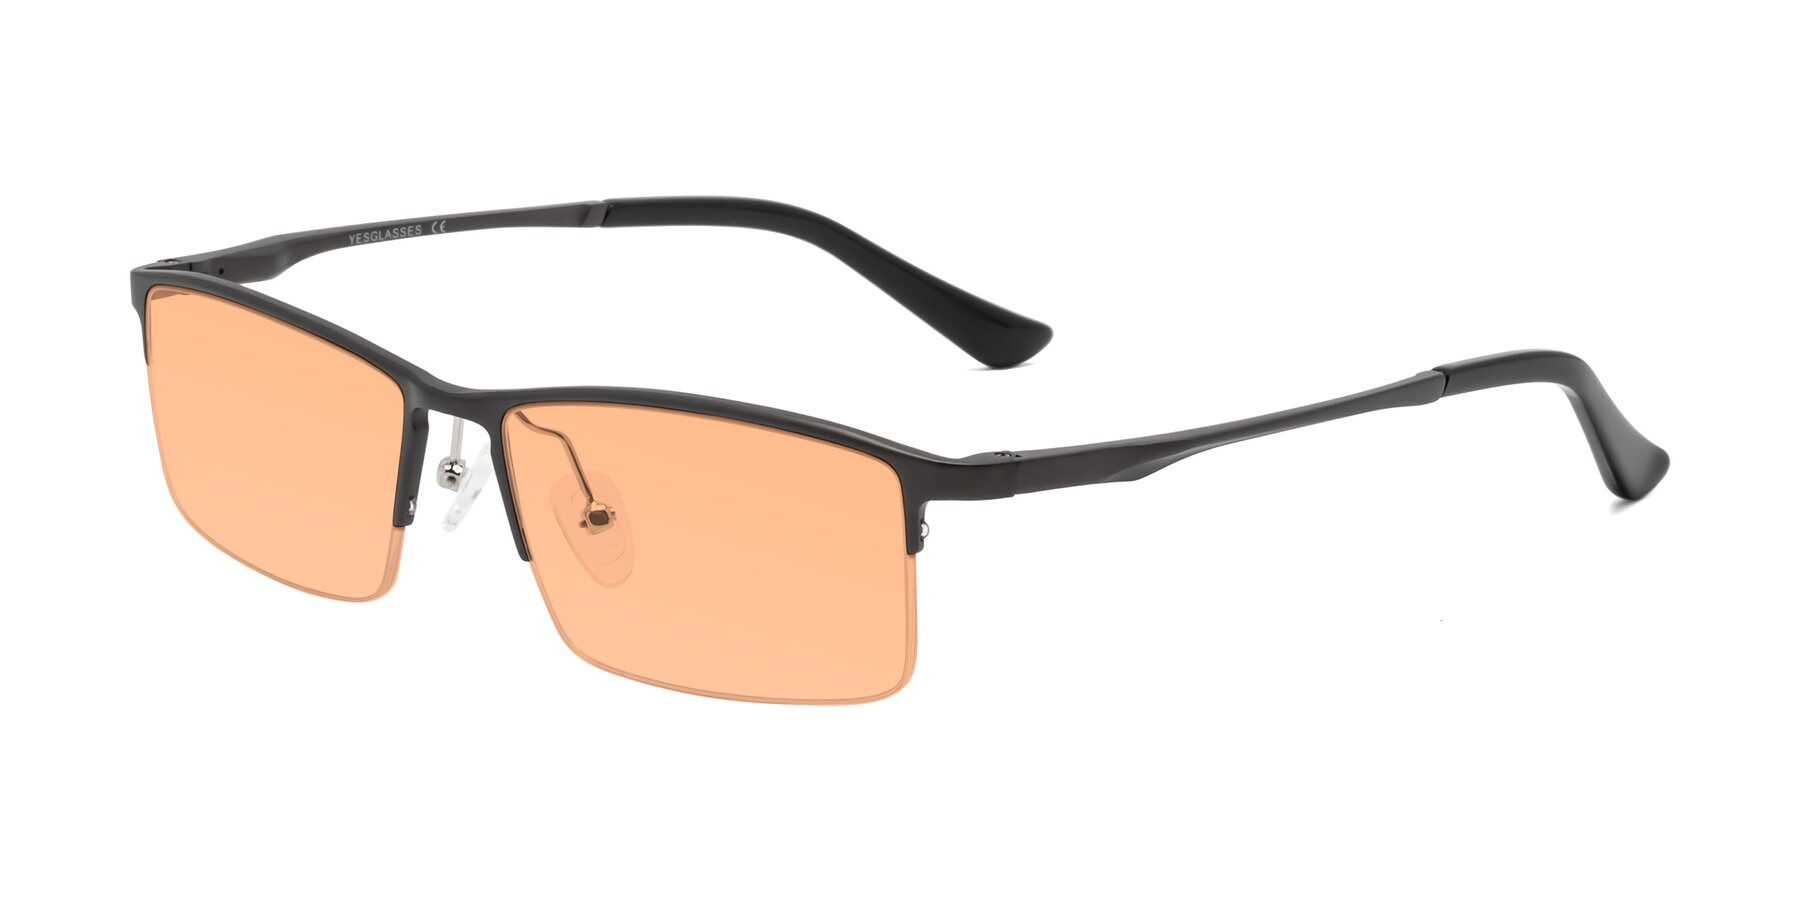 Angle of CX6263 in Gunmetal with Light Orange Tinted Lenses